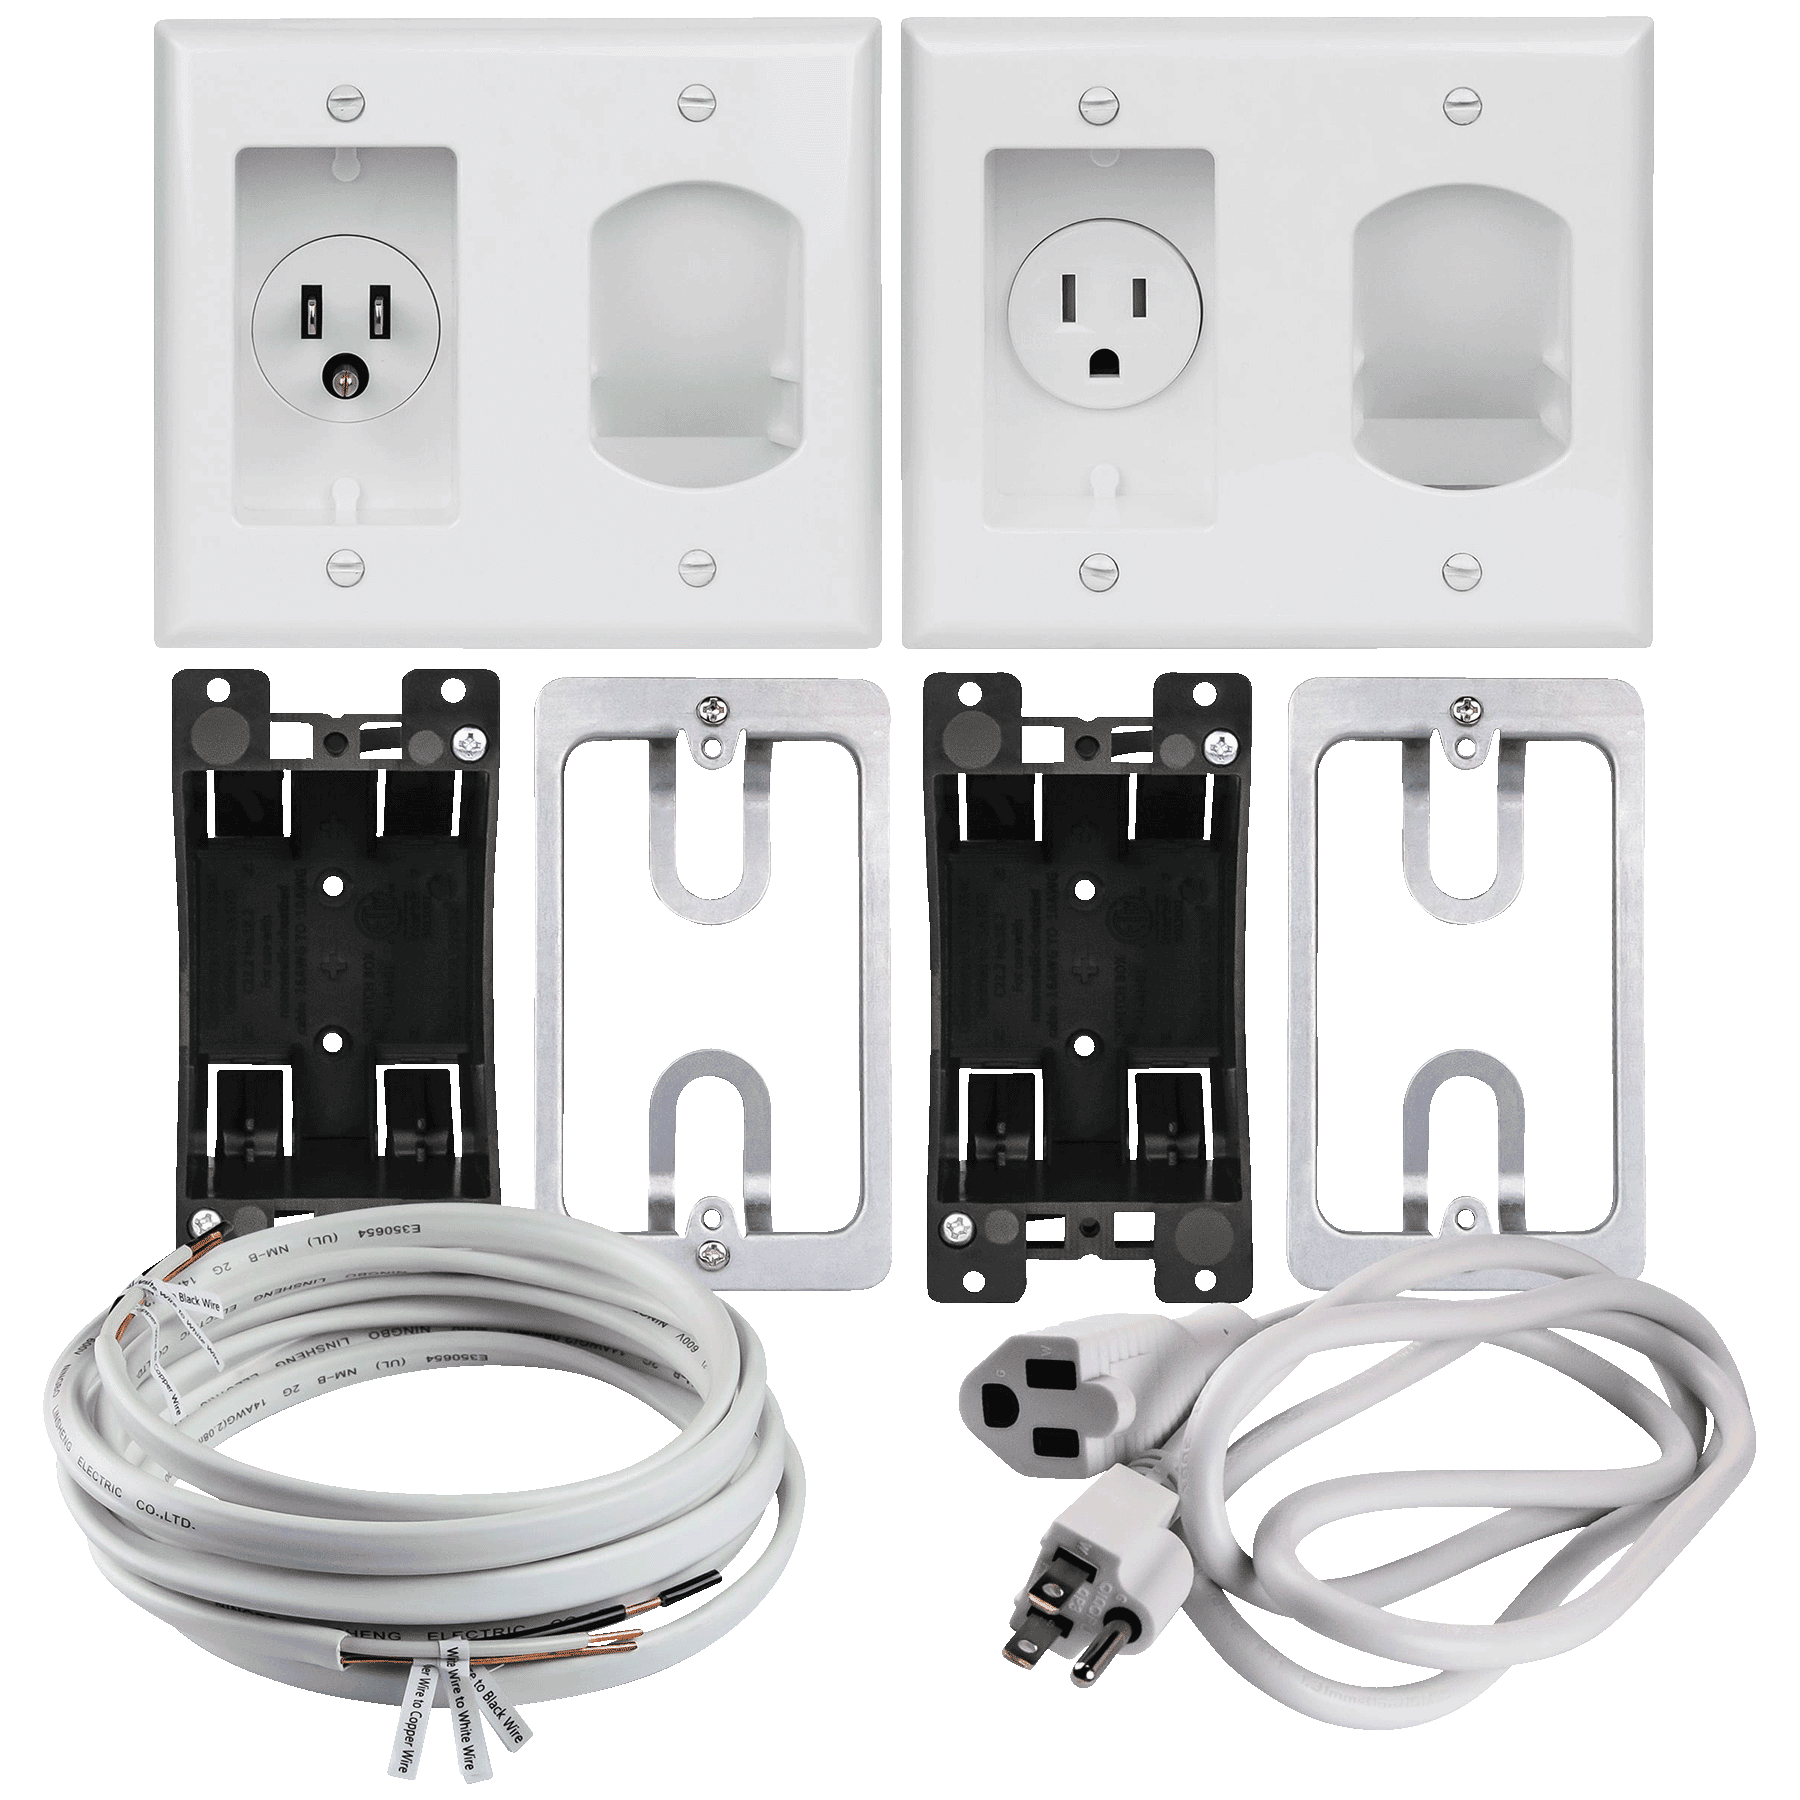 2-Gang Recessed Low Voltage Pass-Through Wall Plate Cable Management System